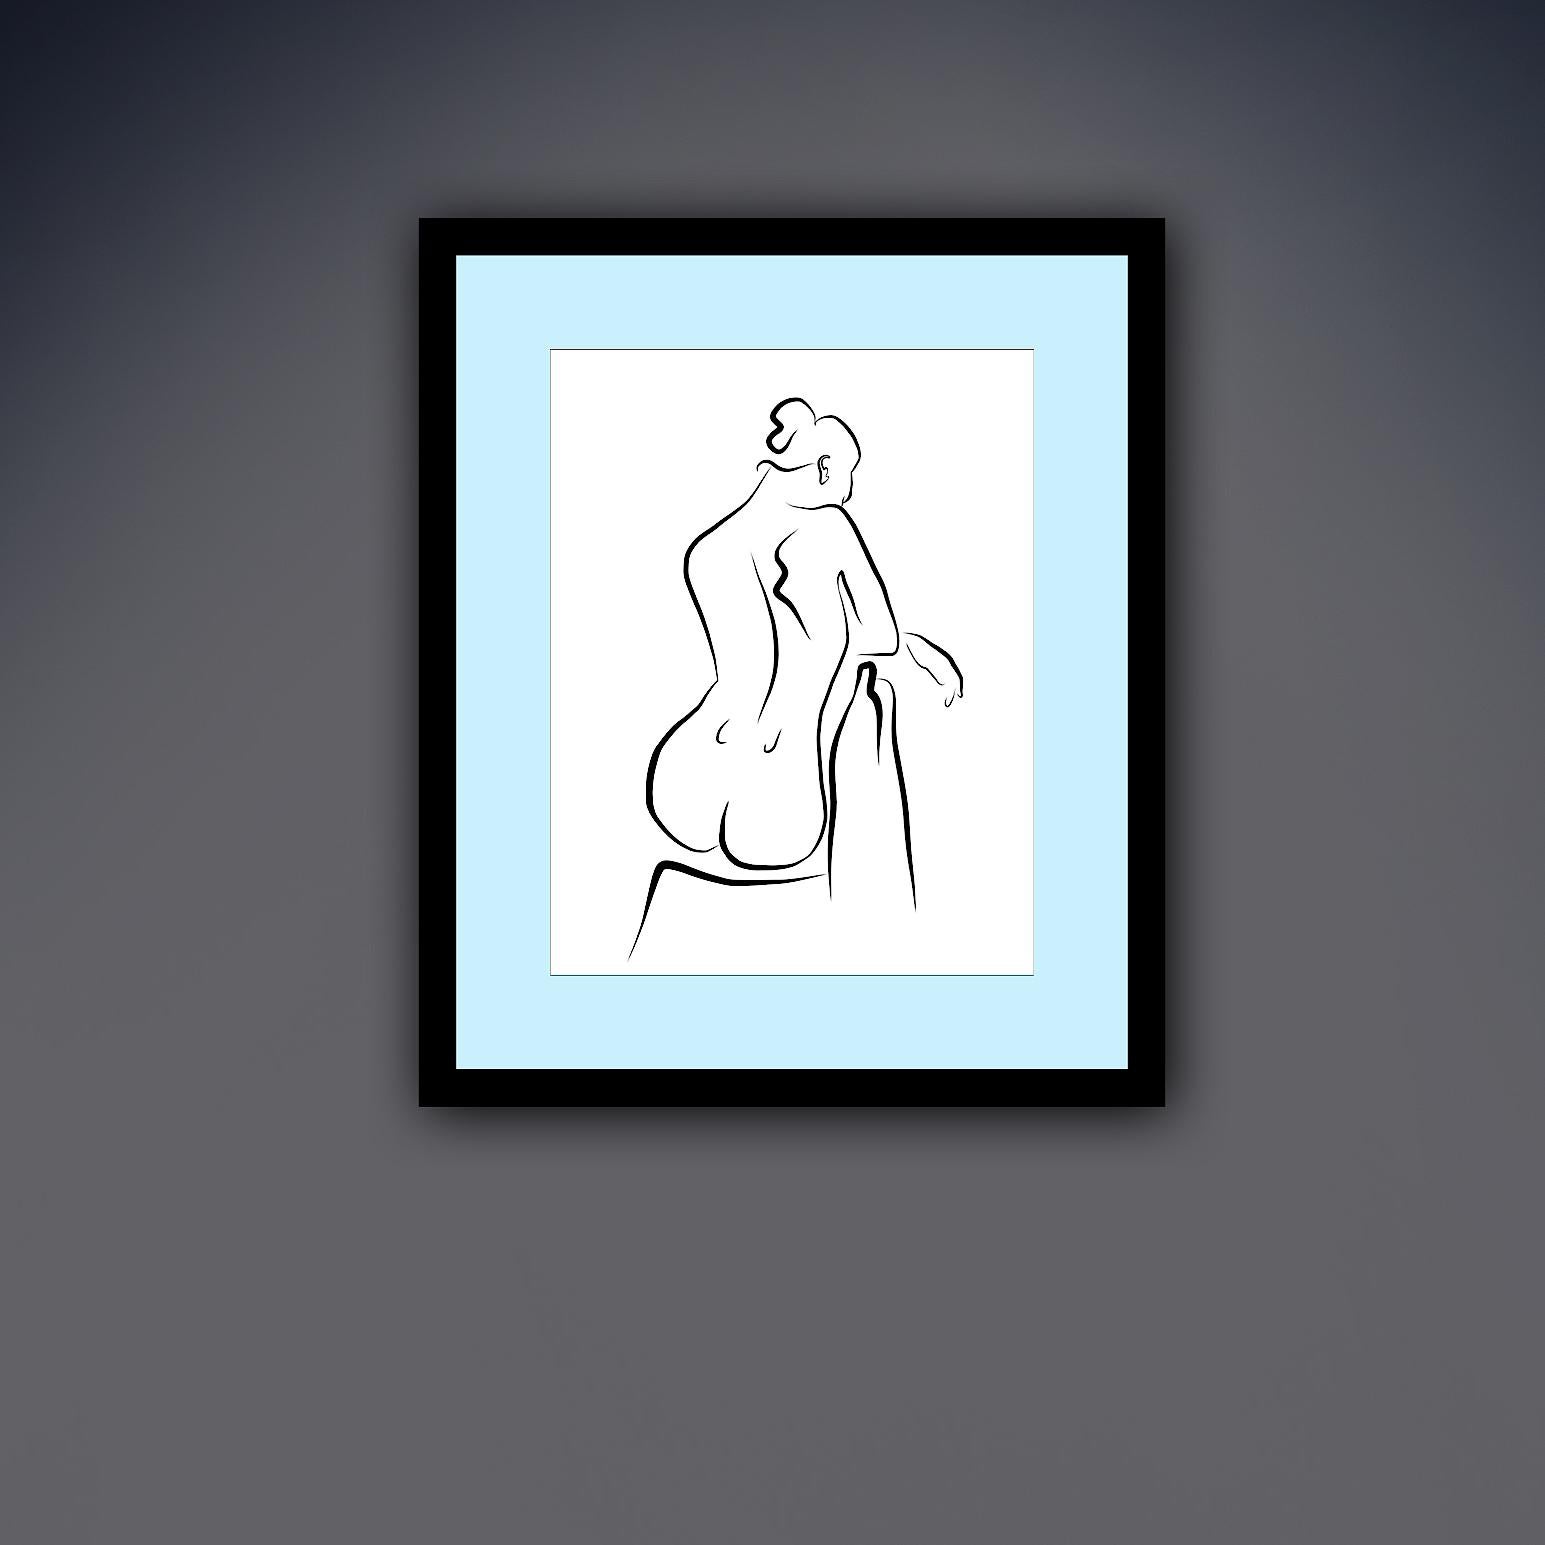 Haiku #57 - Digital Vector Drawing Seated Female Nude From Rear - Contemporary Print by Michael Binkley